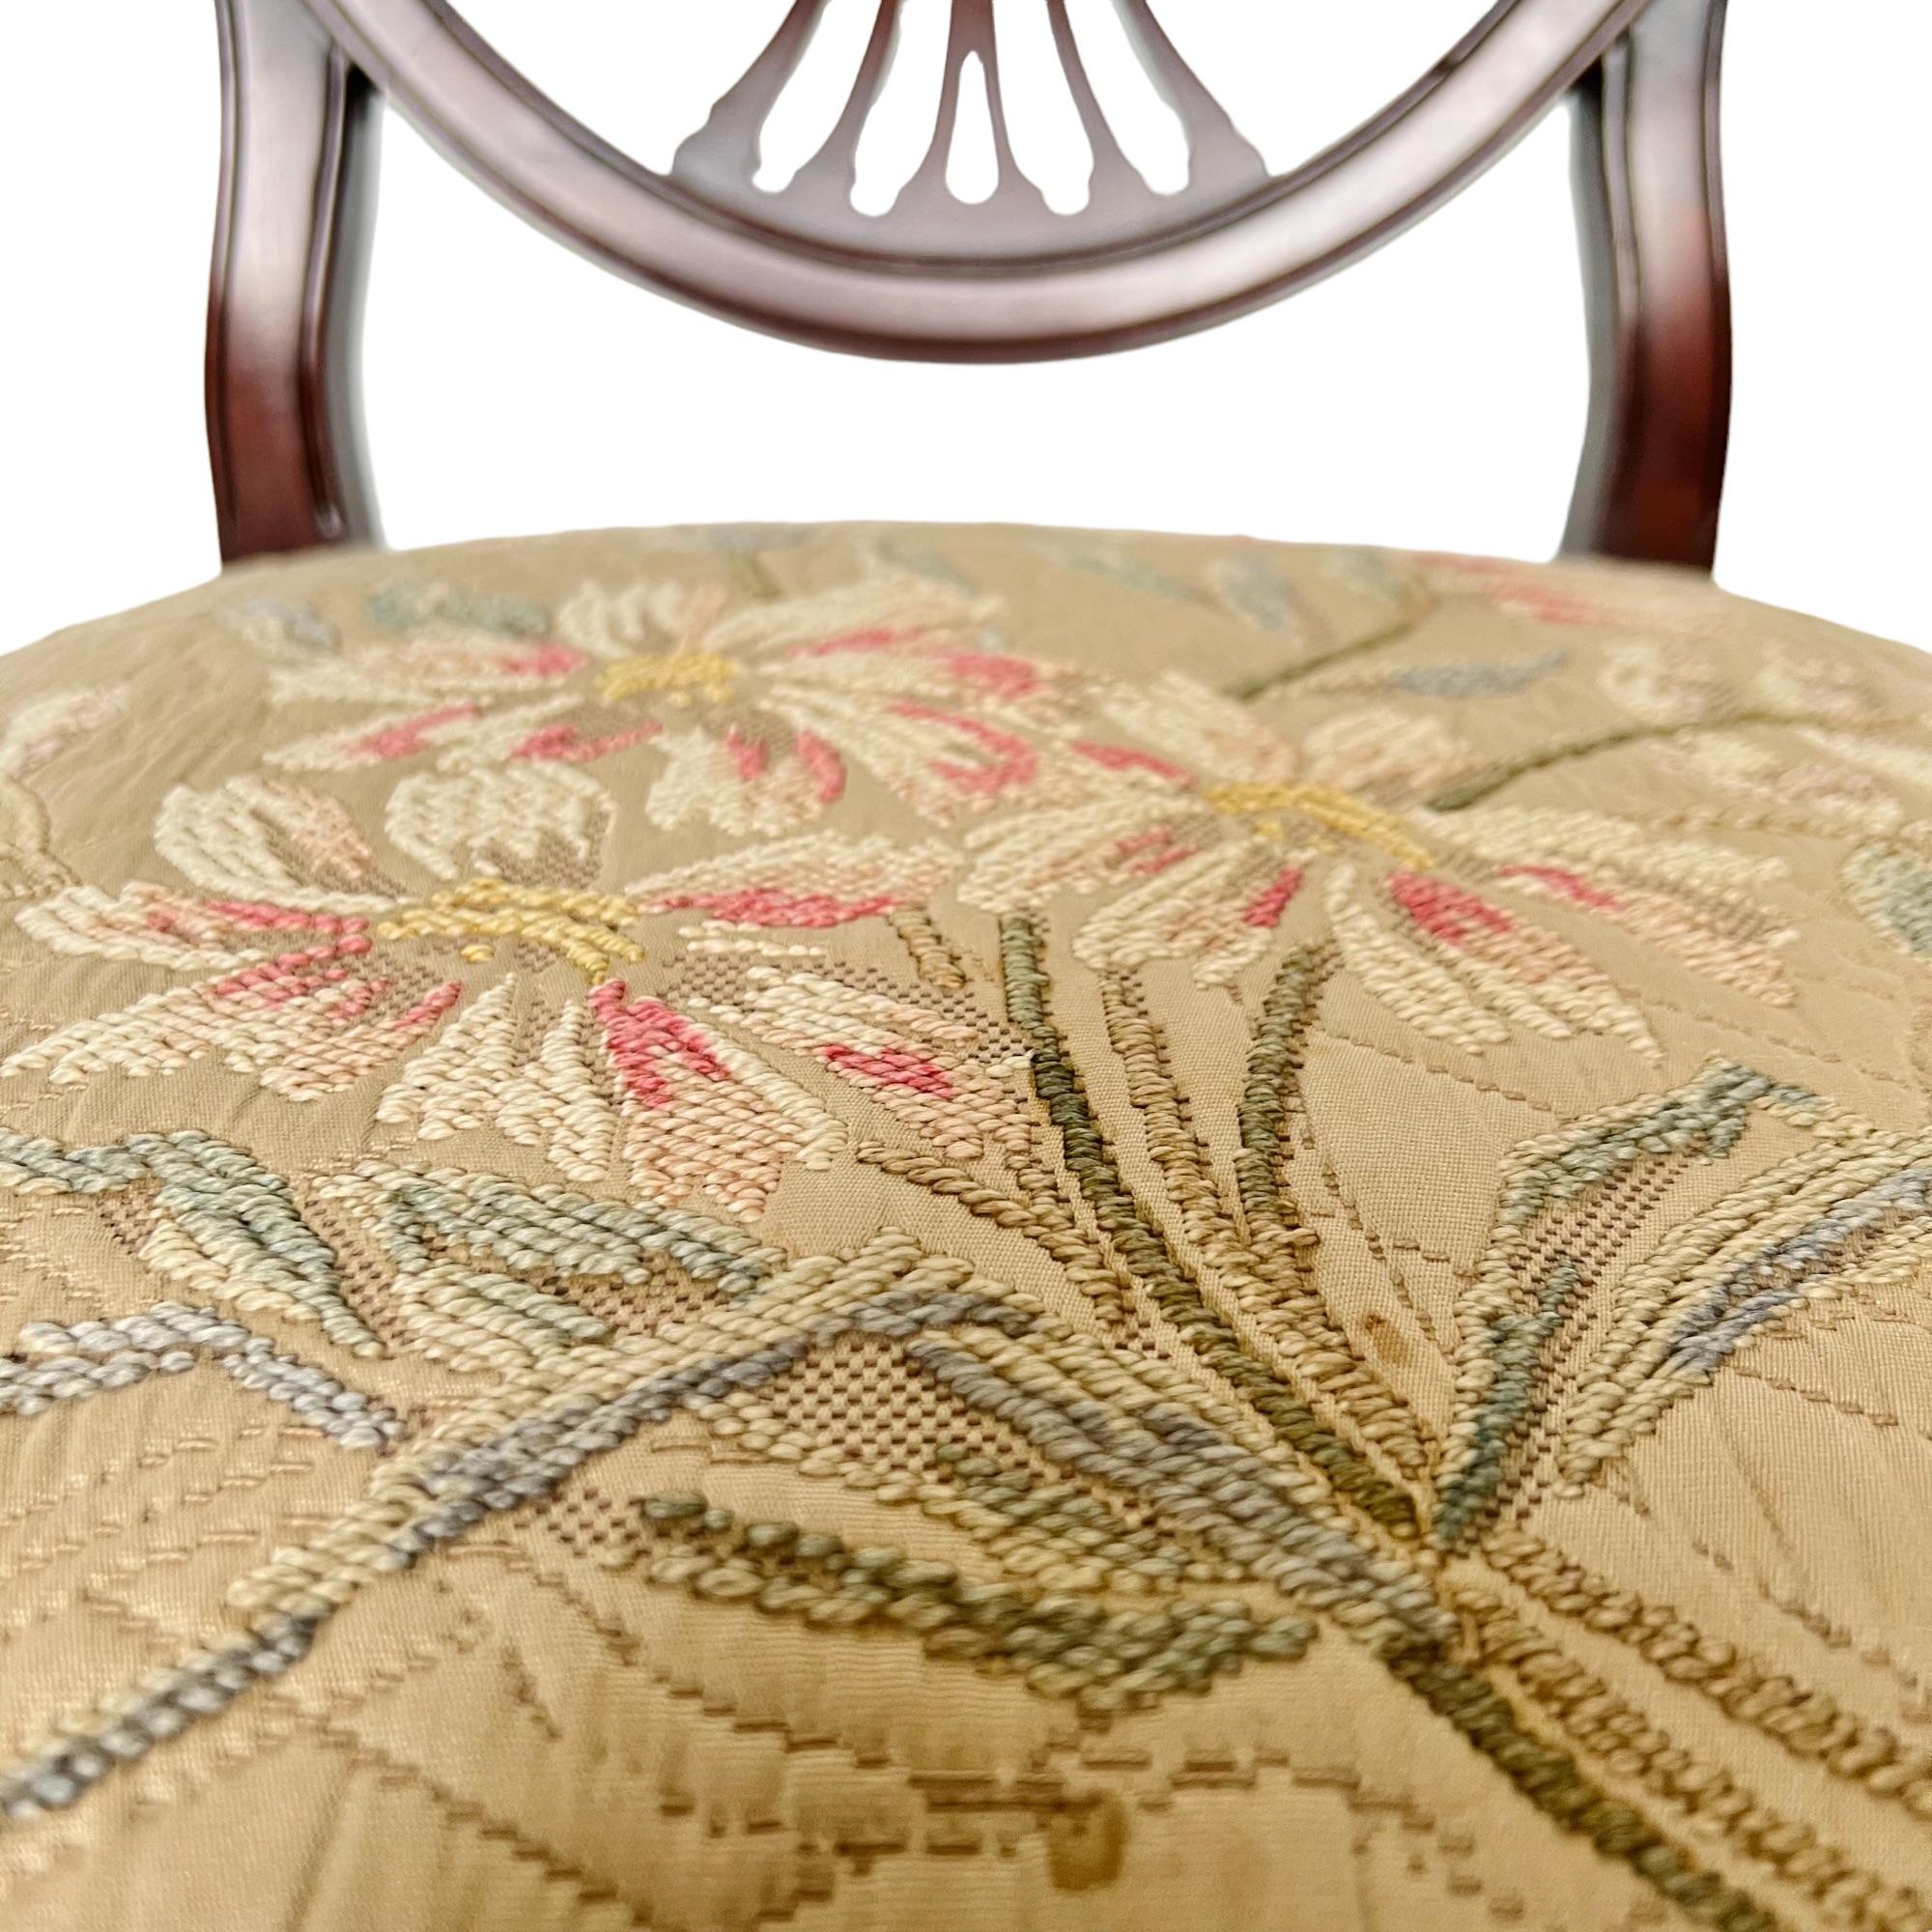 Sheraton Shield Back Embroidered Accent Chair, 1940s For Sale 1